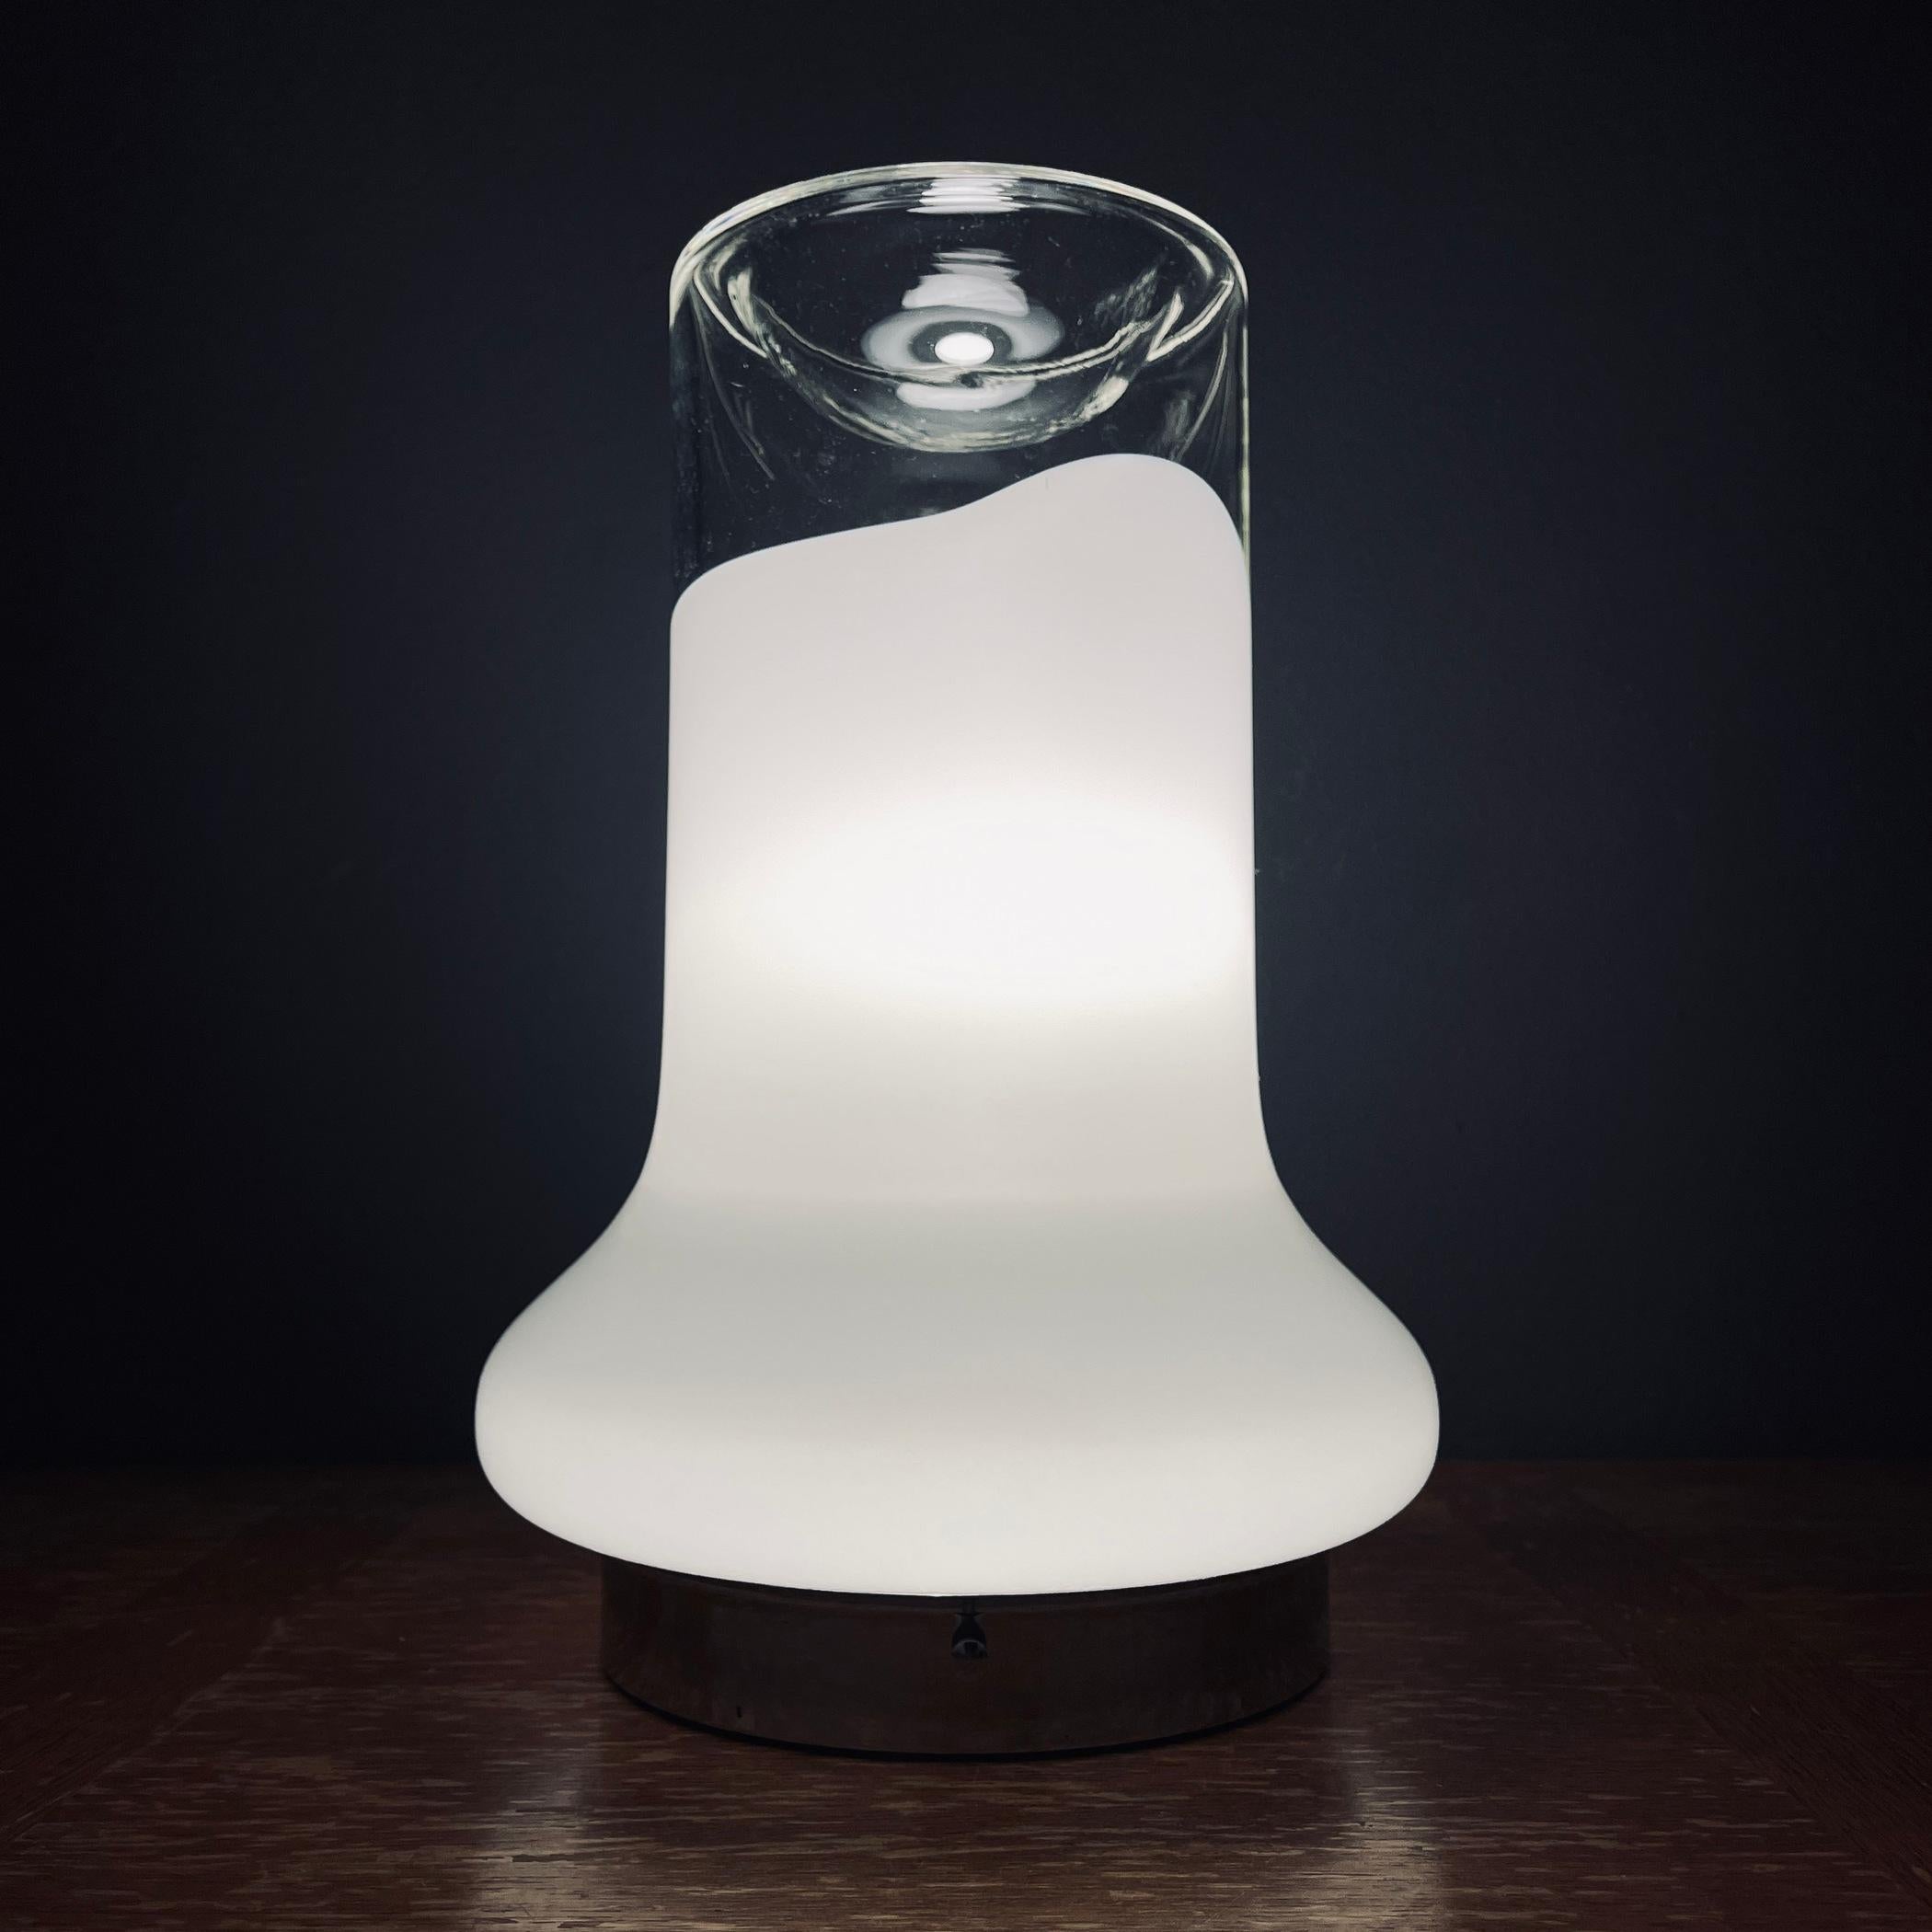 Embrace the nostalgia of 70s Italy with this vintage Murano glass table lamp designed by Roberto Pamio for Leucos. This retro lamp will transport you to the space age era, adding a touch of mid-century allure to your Art Deco or Mid-Century Modern